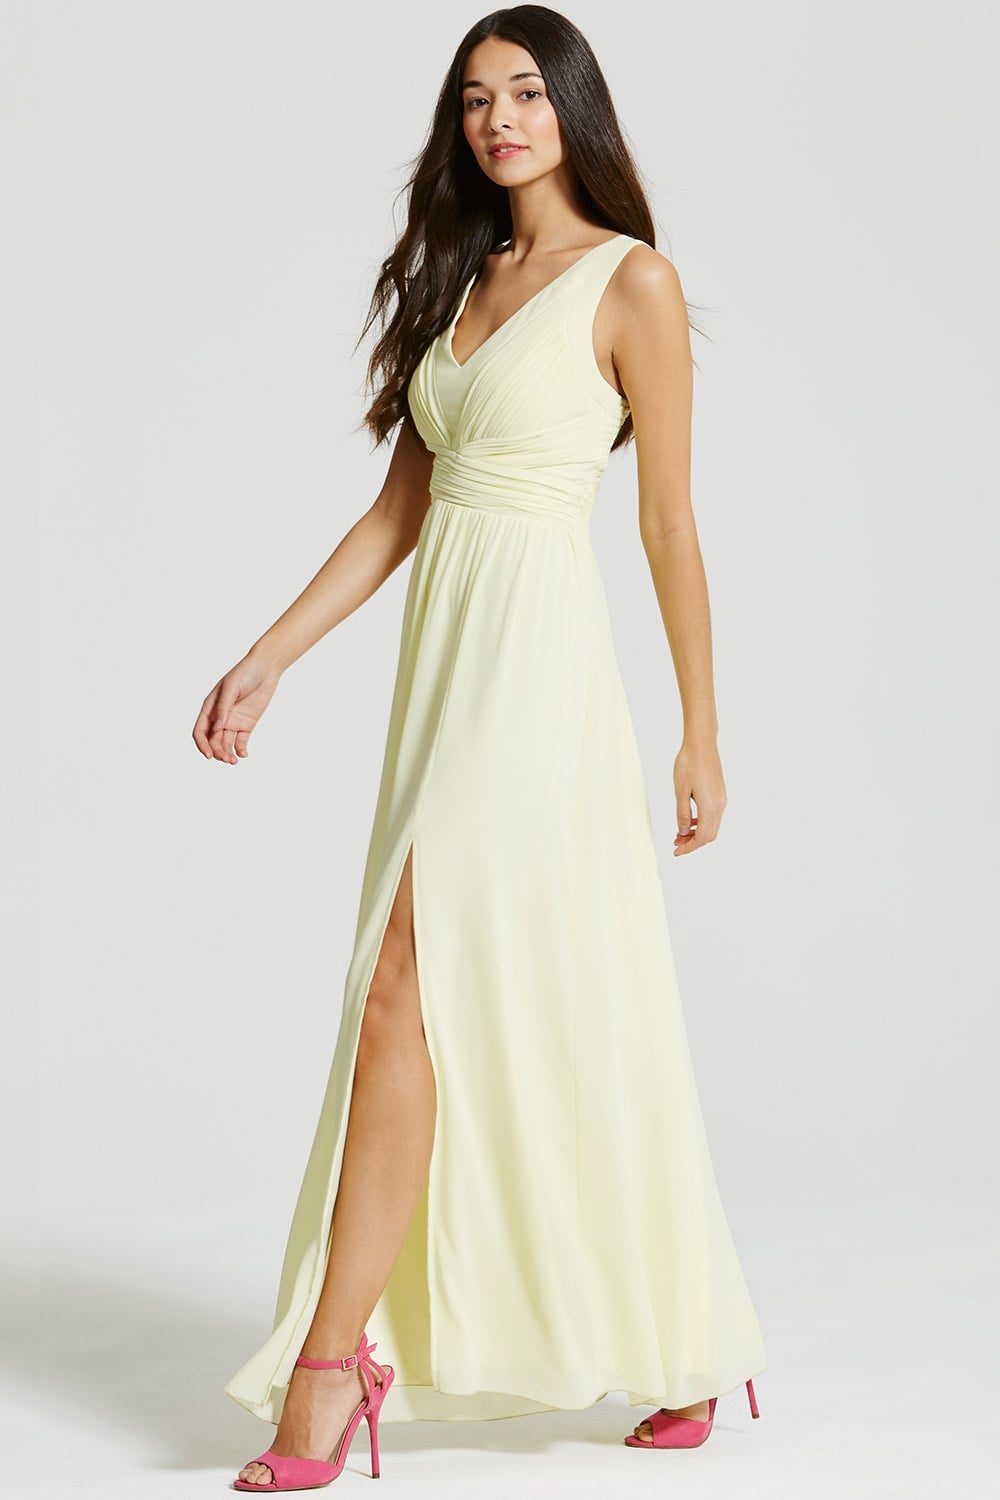 Maxi Dresses A Perfect Choice For All Type of Body Shapes ...